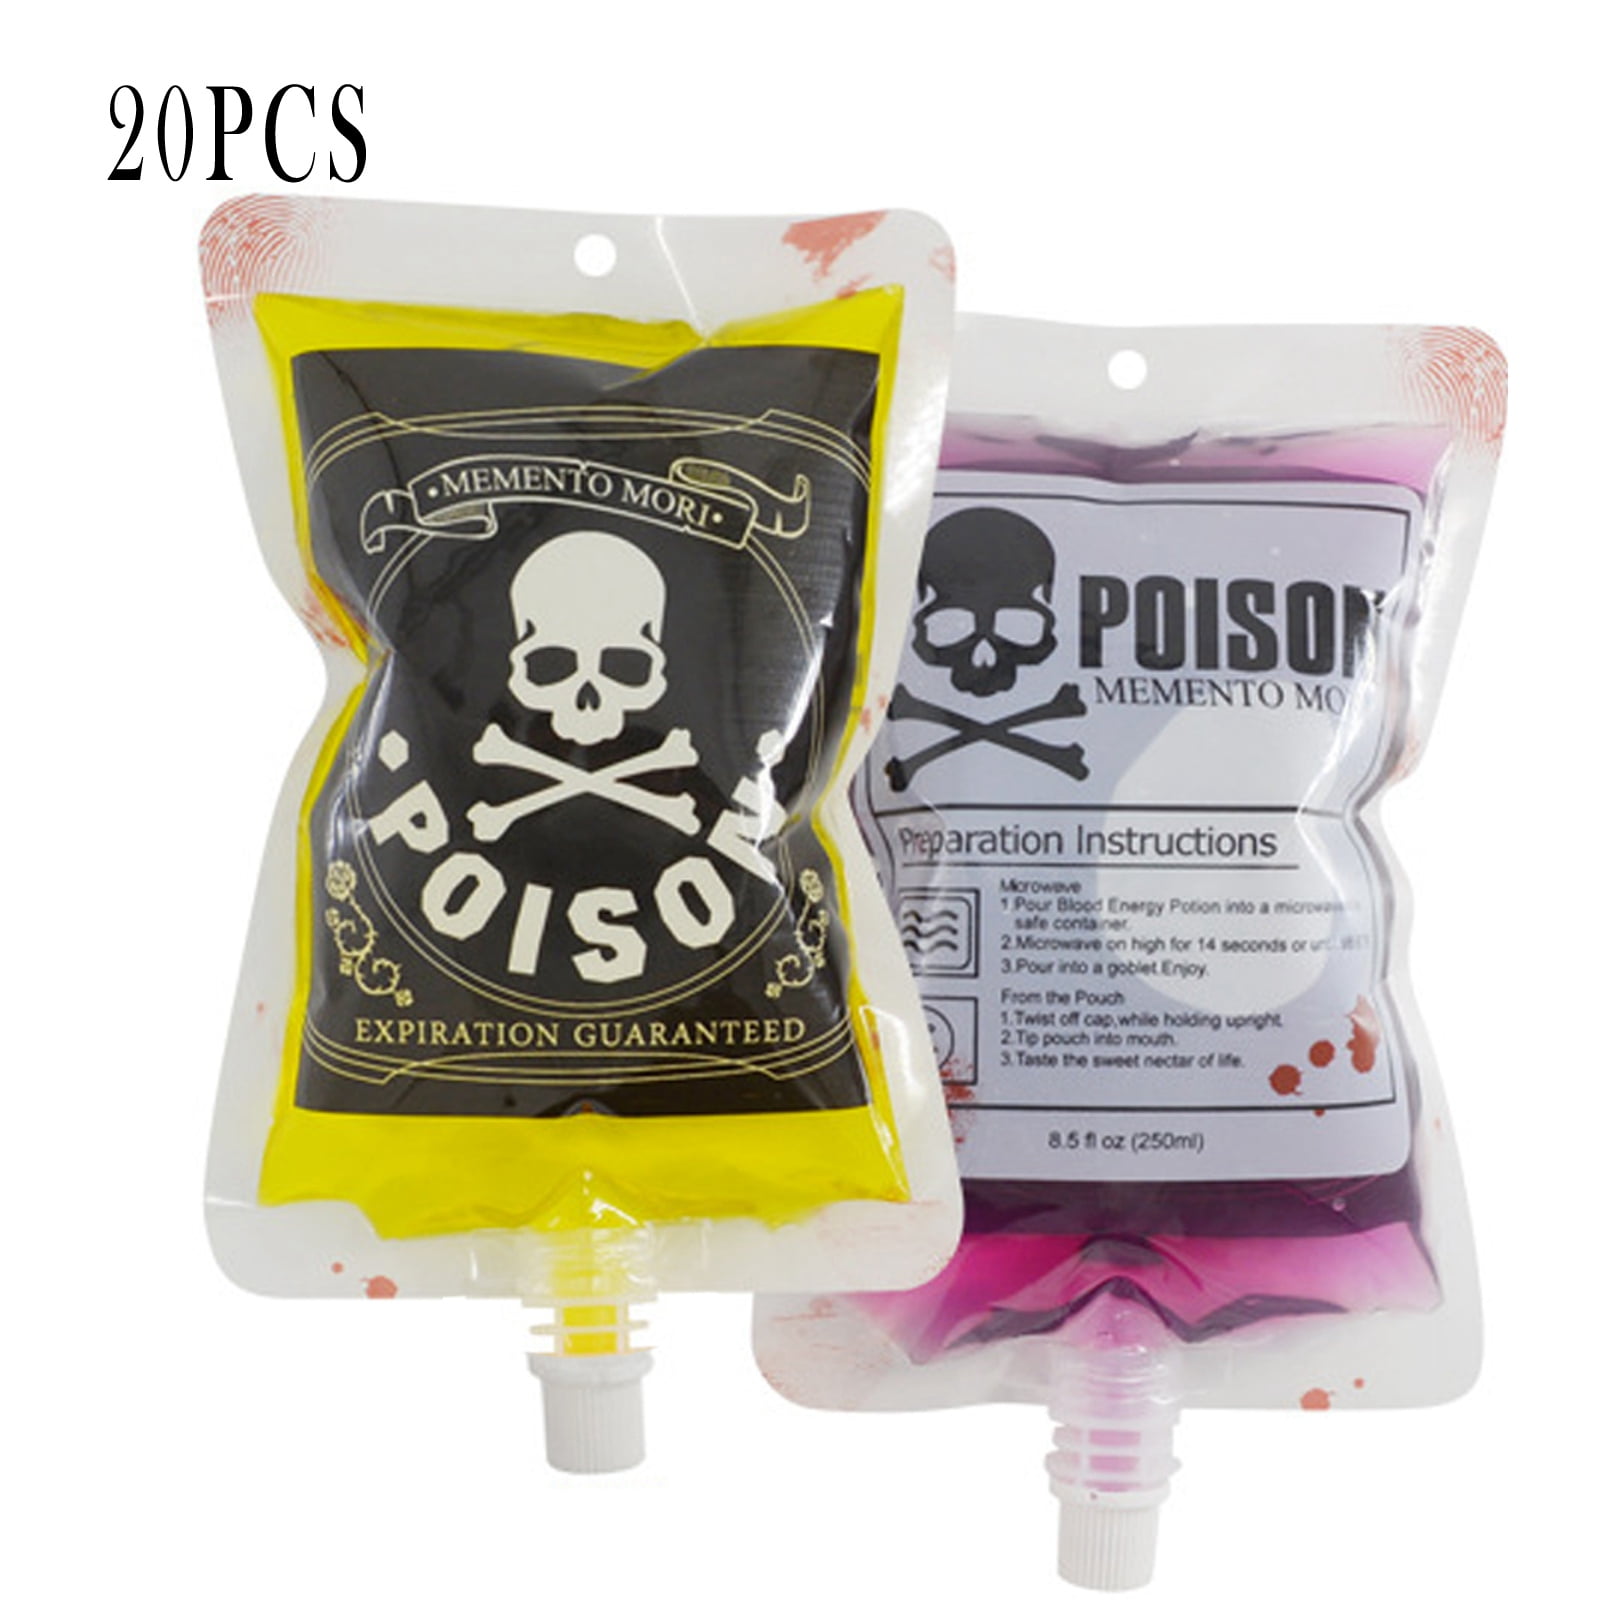 20pcs Reusable Energy Drink Blood Bags Containers Drink Pouches Gag for for Zombie Vampire Party Theme Party Supplies Blood Bags for Drinks